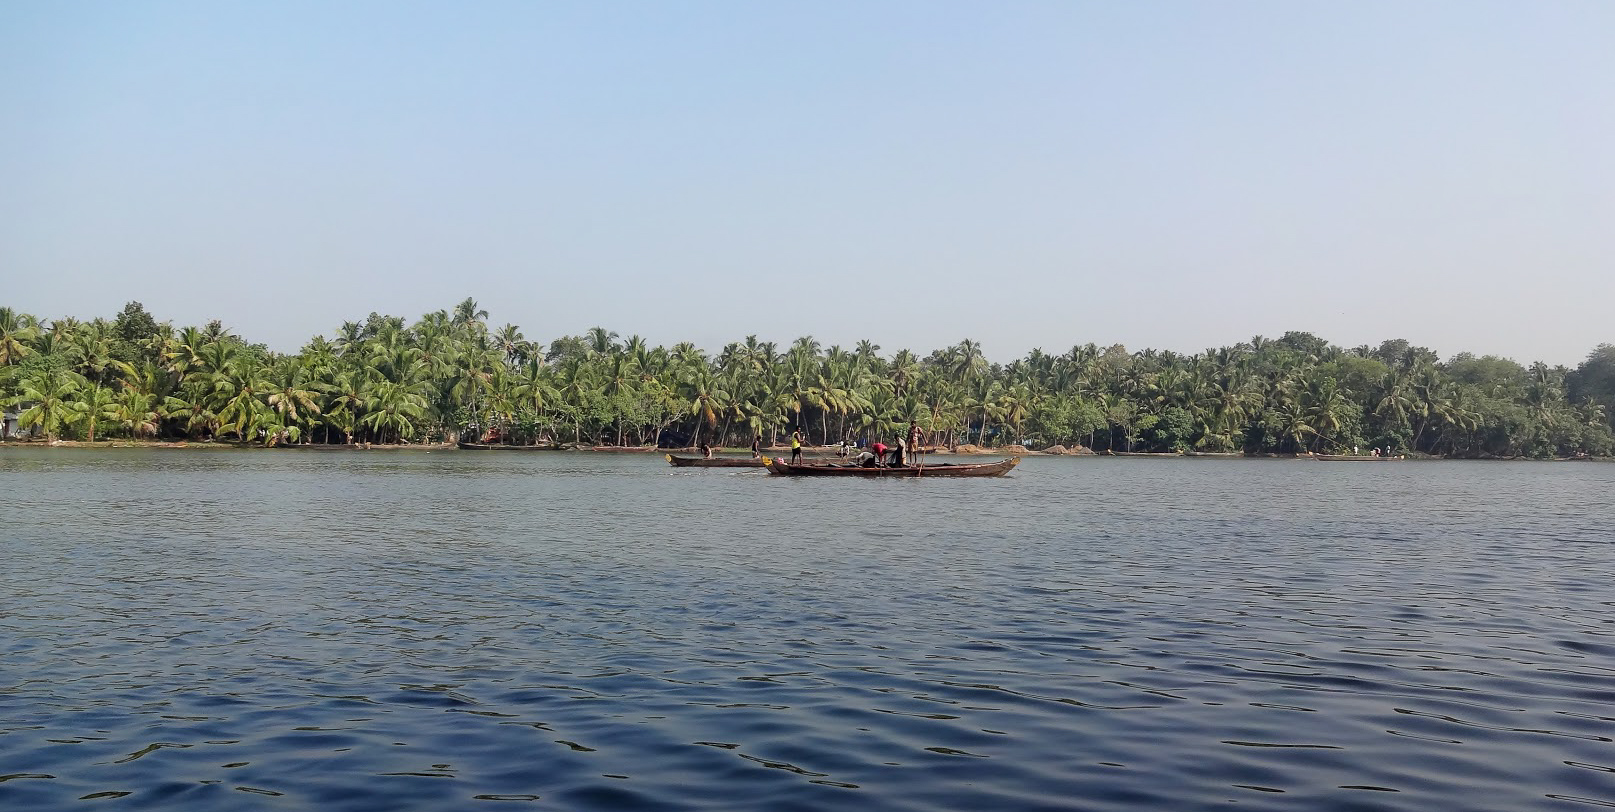 Indian men fishing from wooden boats in the Kappil Backwaters, Kerala, India